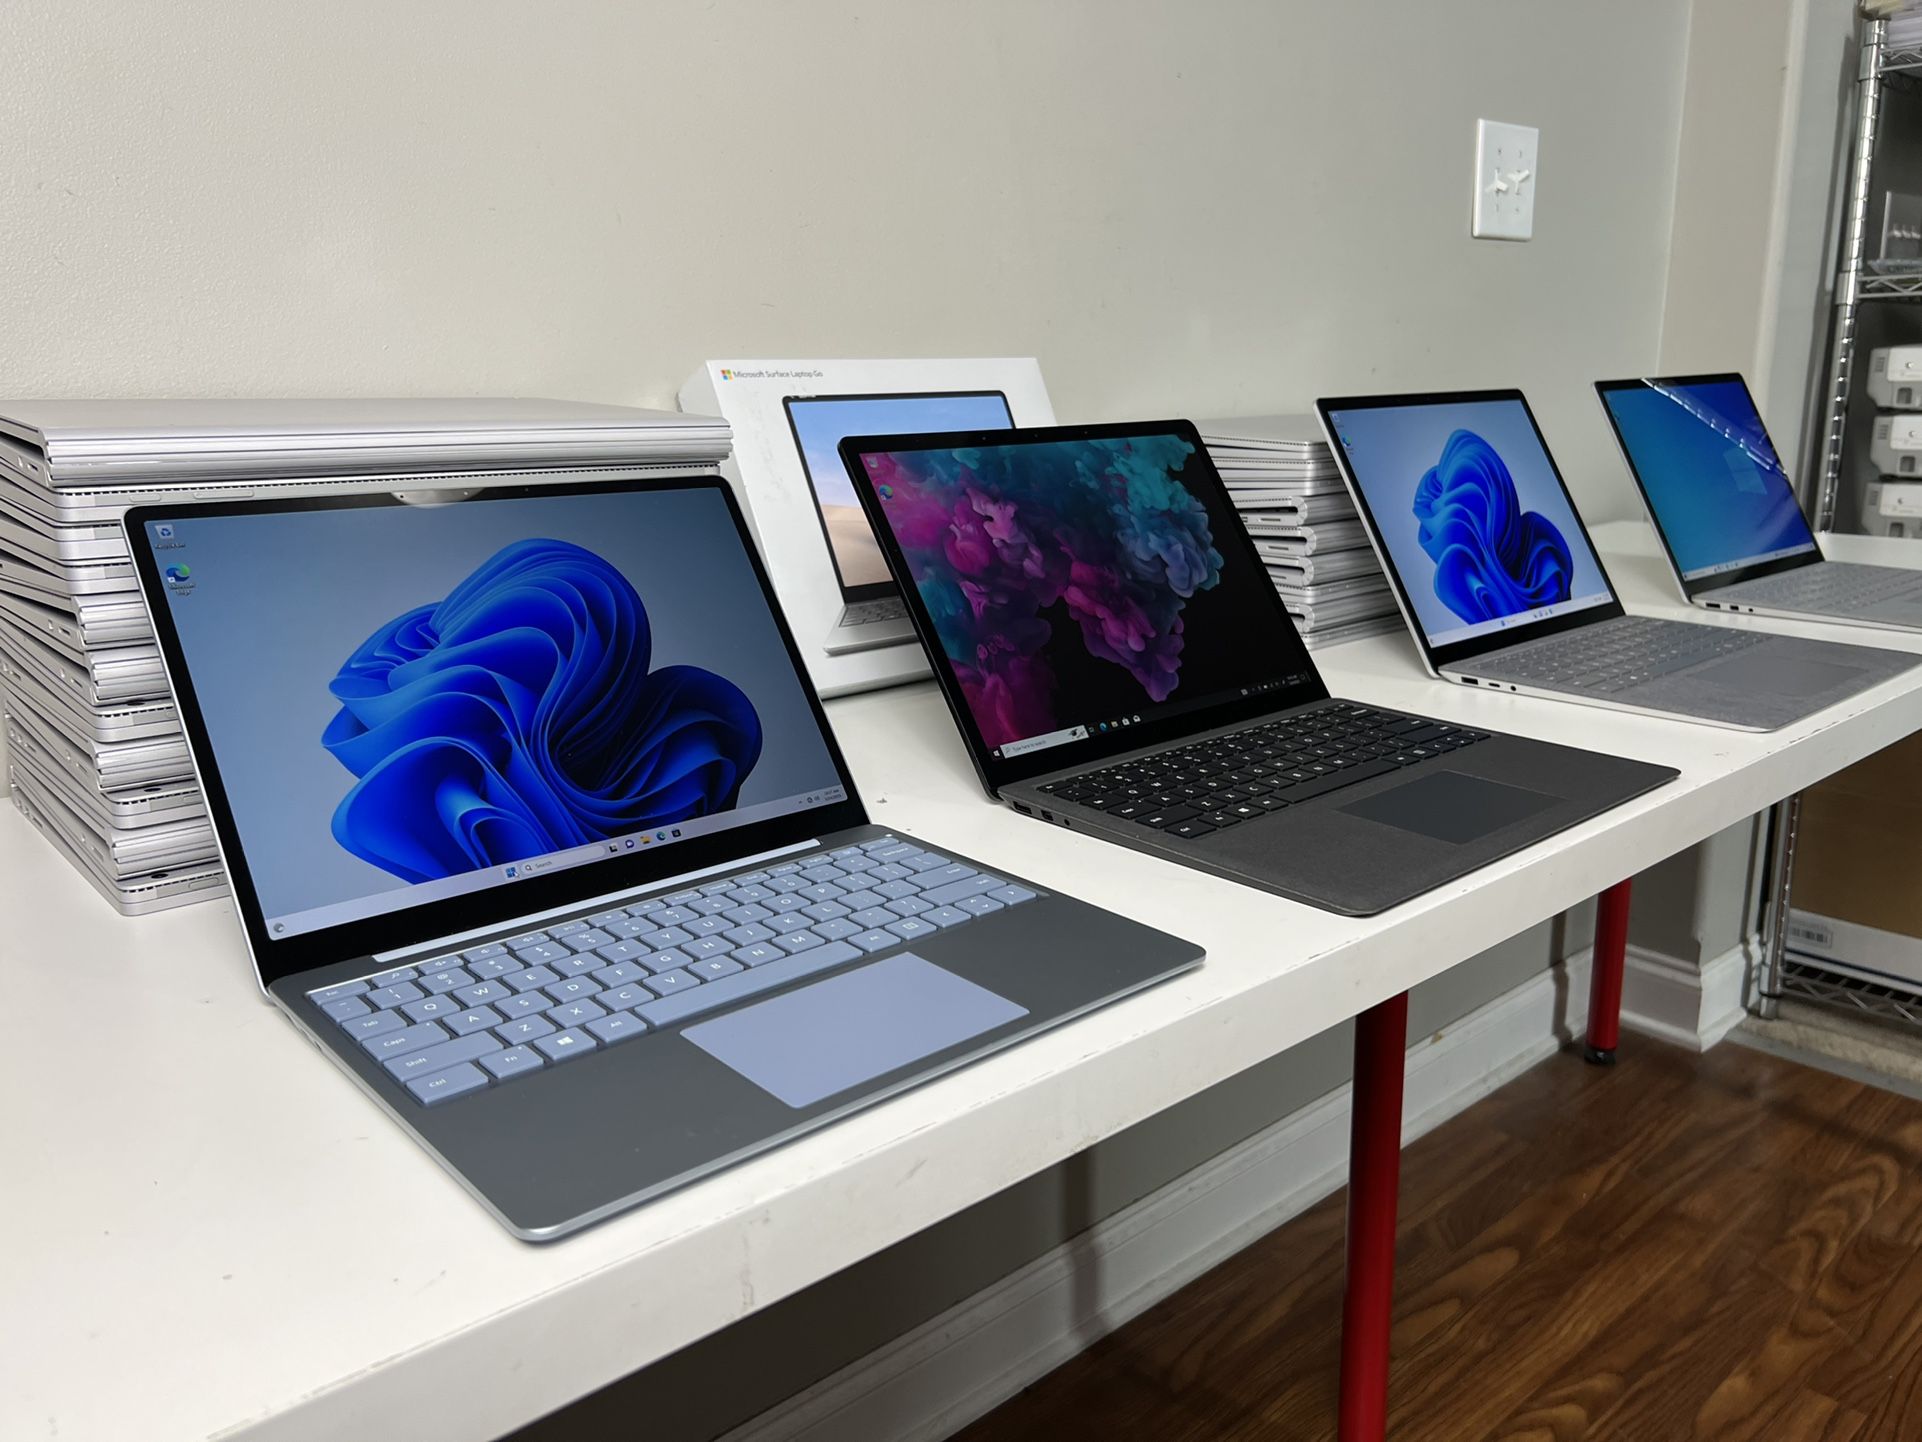 Microsoft SurfacePro Tablets (see details)